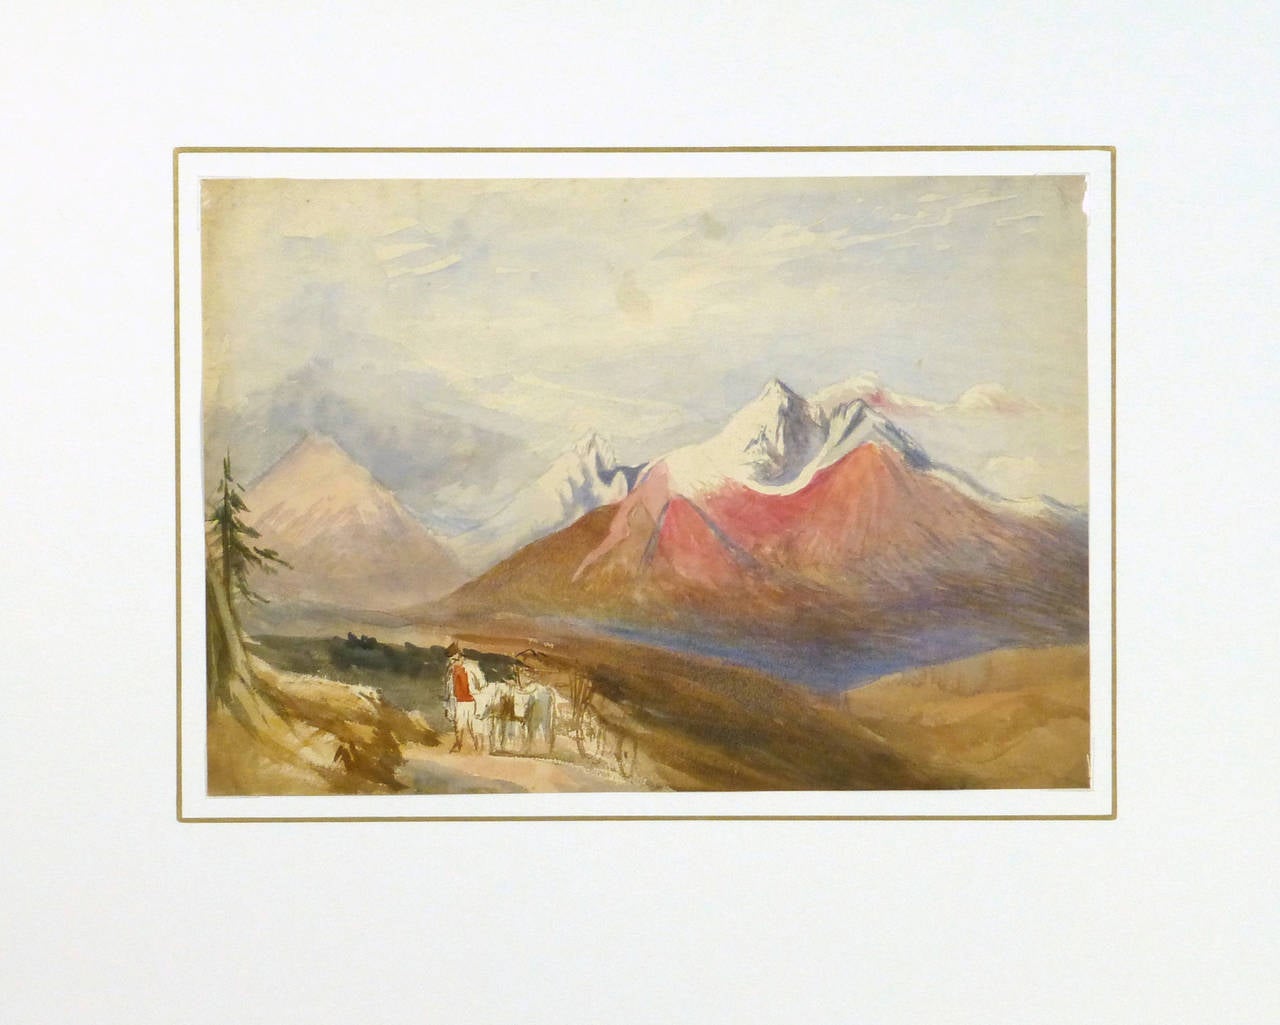 Fabulous watercolor landscape of a sweeping view of snow covered mountains, a man pulls a cart with his steer in the foreground, 1871. Dated on verso. Artist unknown.

Original vintage one-of-a-kind artwork on paper displayed on a white mat with a